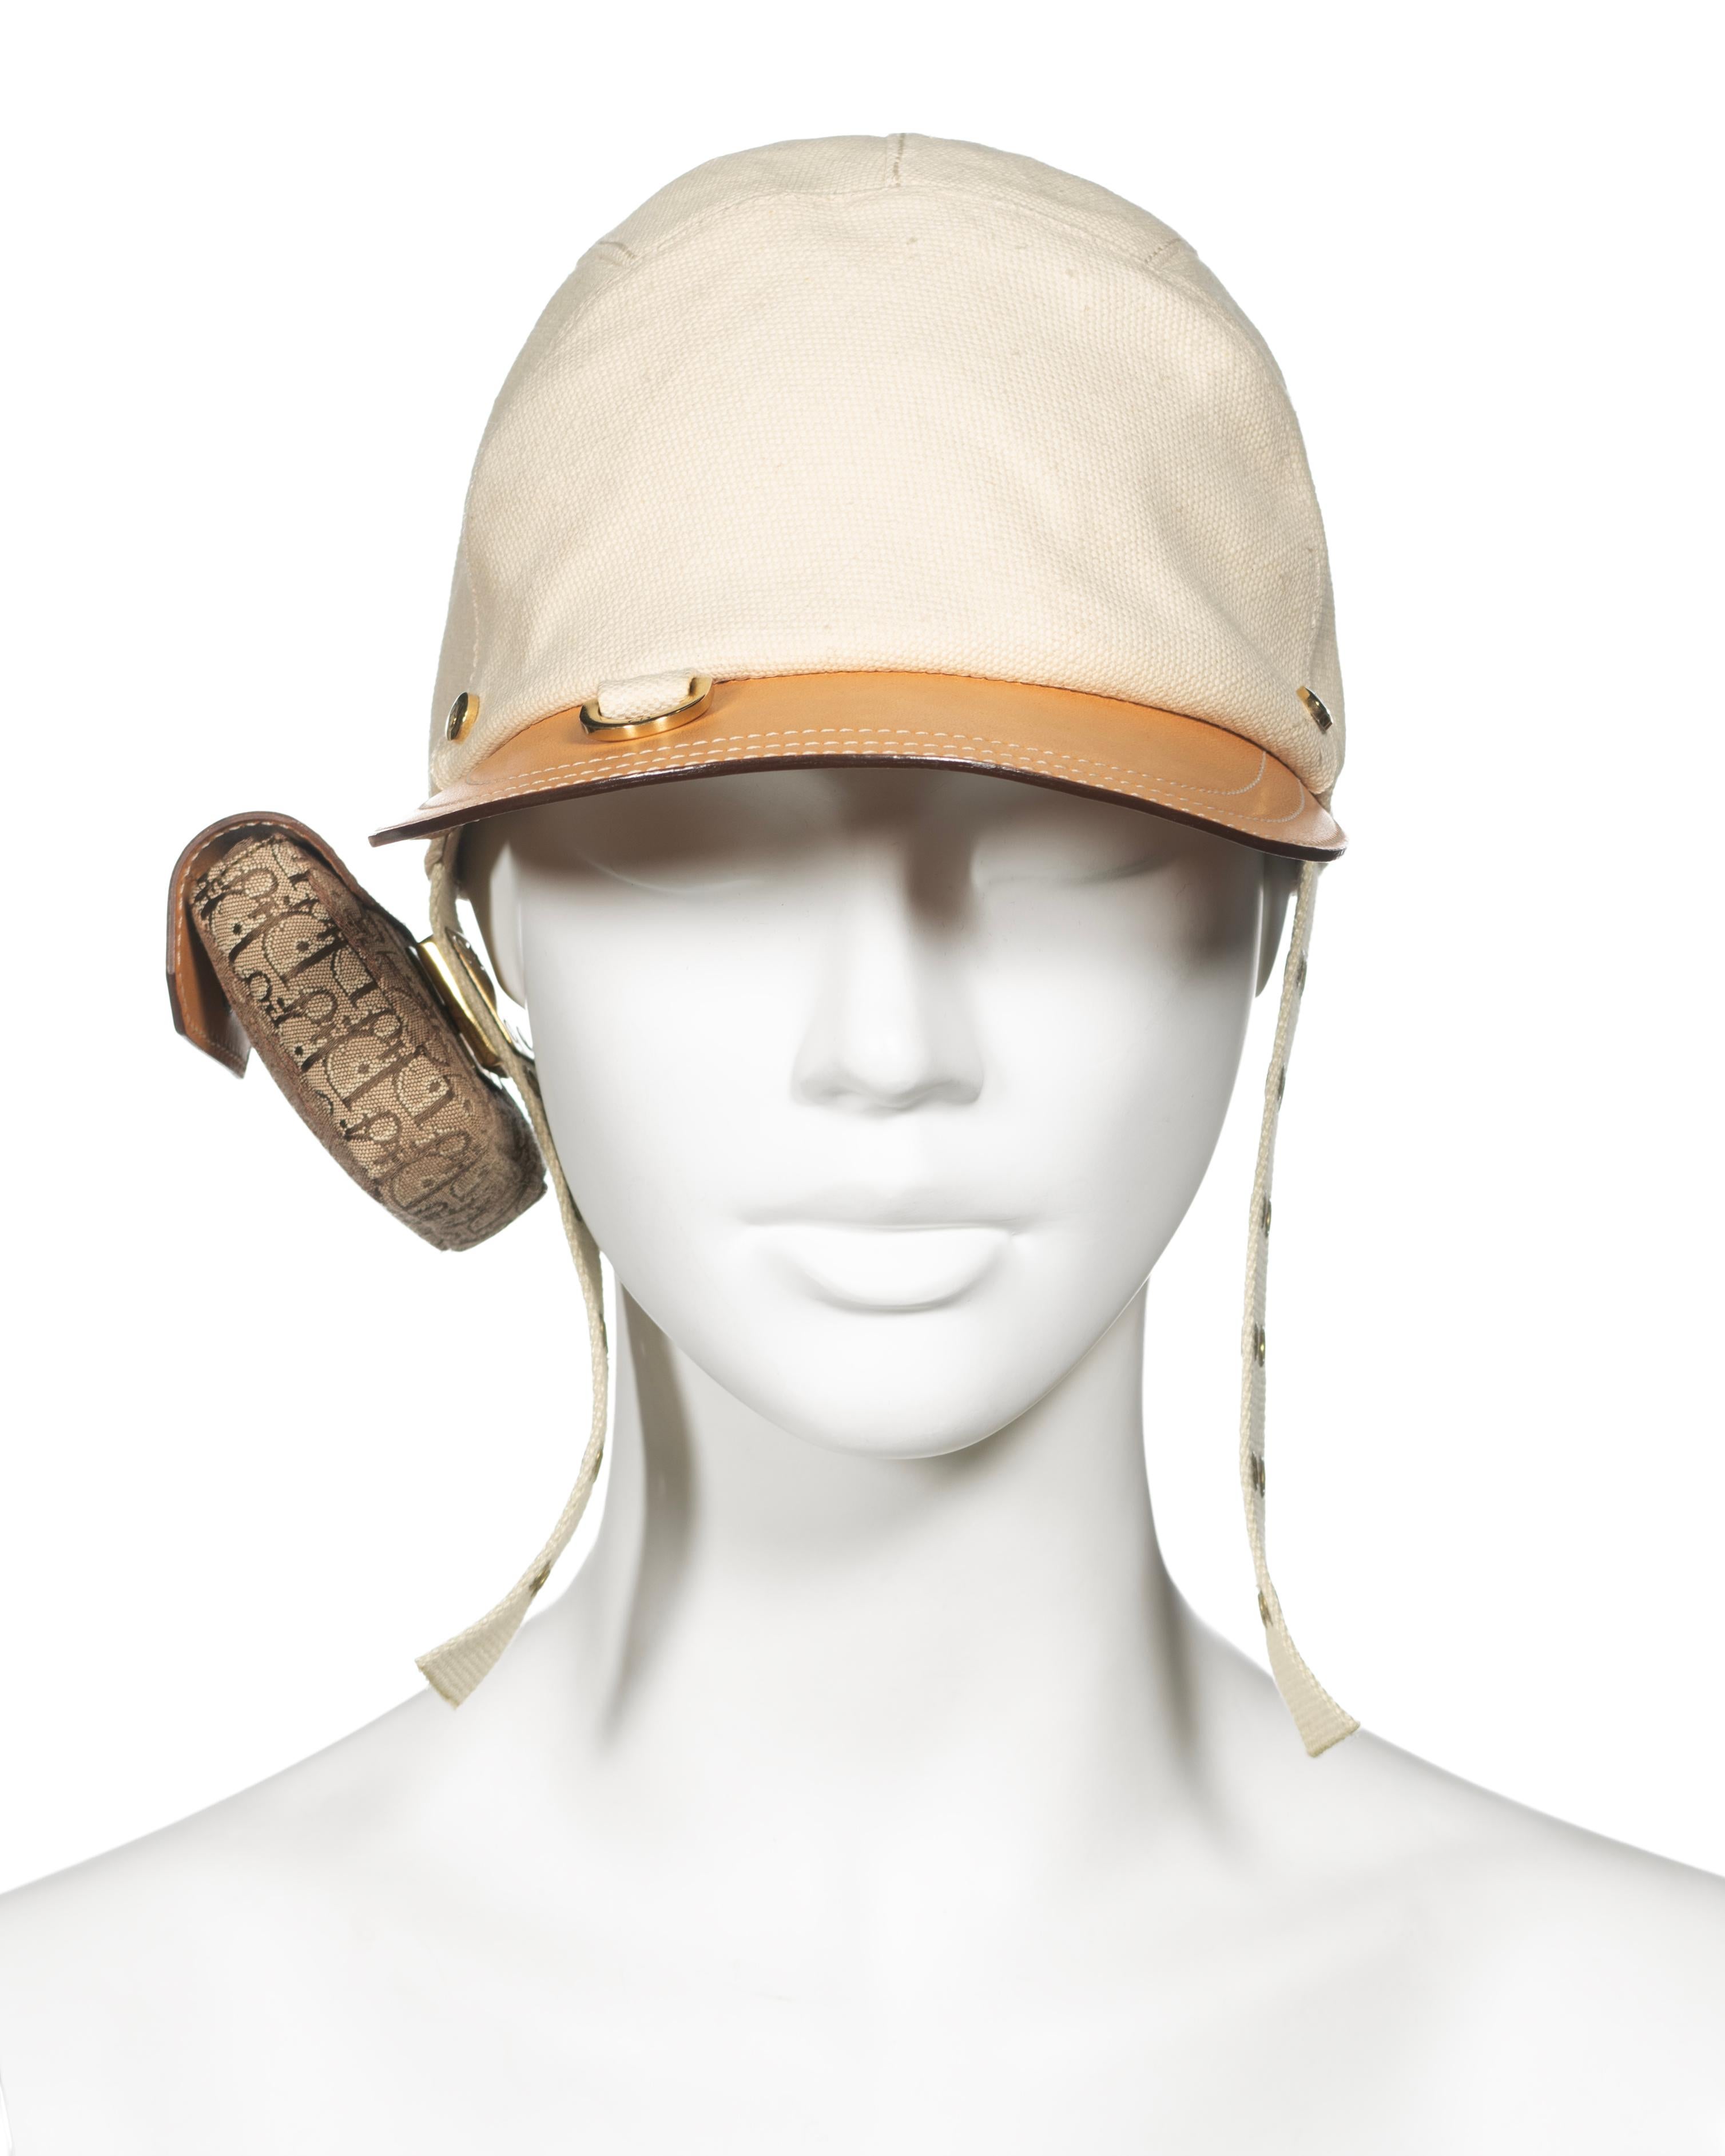 ▪ A Rare Christian Dior Cap
▪ Creative Director: John Galliano
▪ Spring-Summer 2002
▪ Crafted from robust cream cotton canvas
▪ Tan leather visor featuring cream contrast stitch trim, adorned with a gilded gold D-ring reminiscent of horse saddle